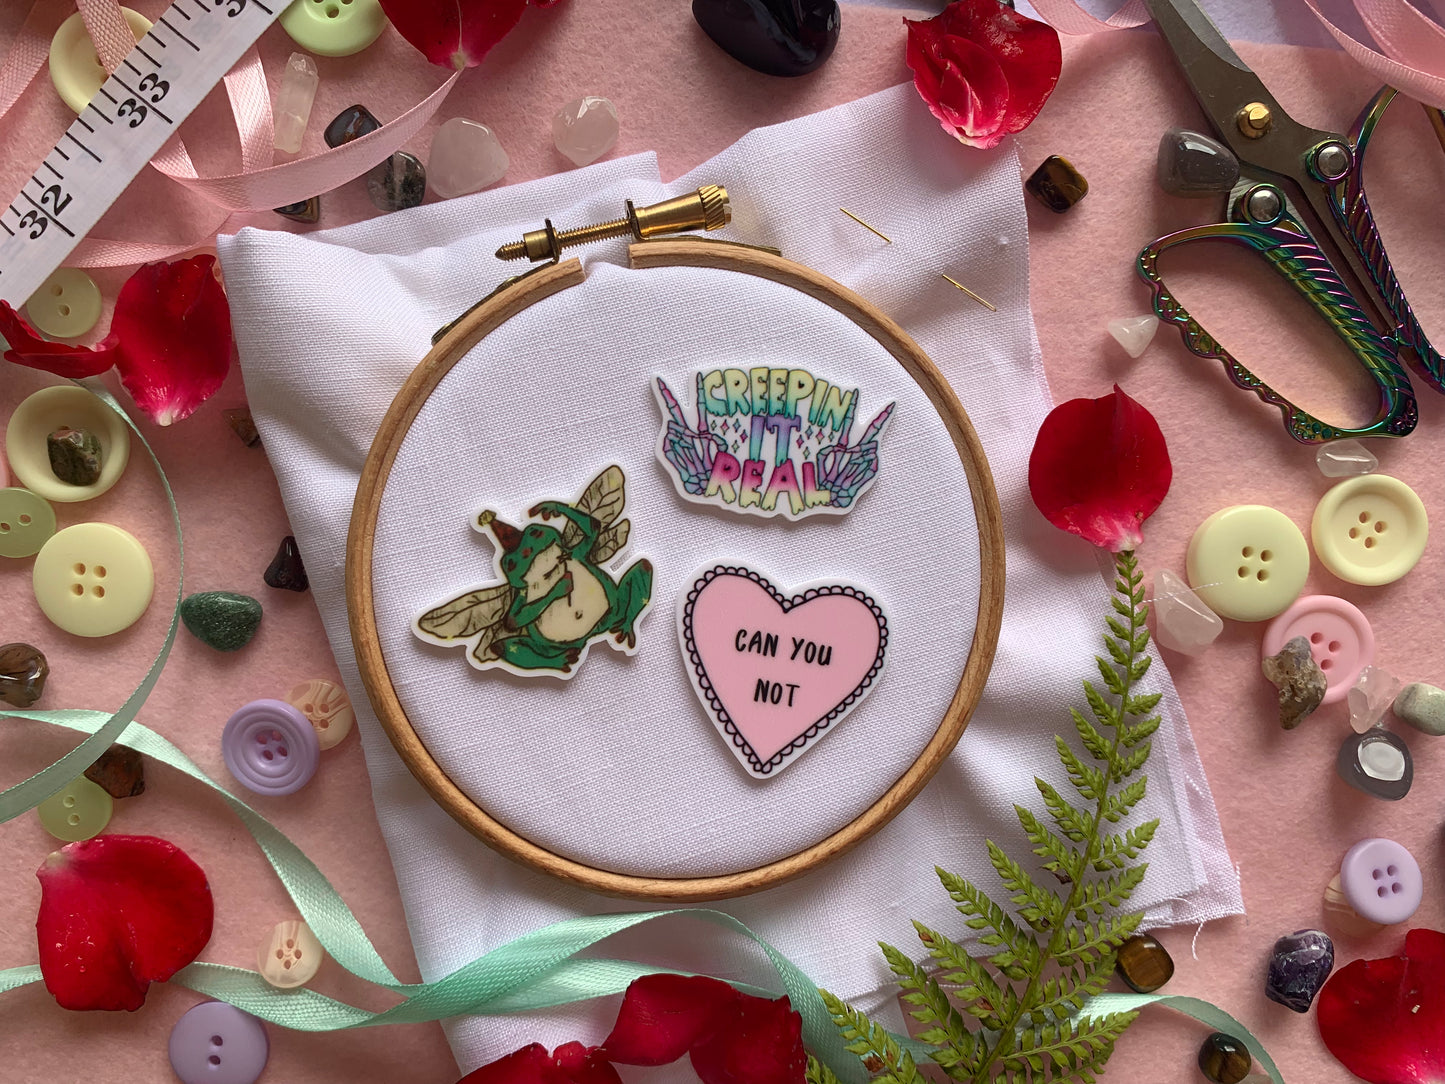 Creepin Real Frog Fairy Sassy Heart Spooky Heart Needleminder Cross Stitch Needle Holder Embroidery Witchy Cottagecore